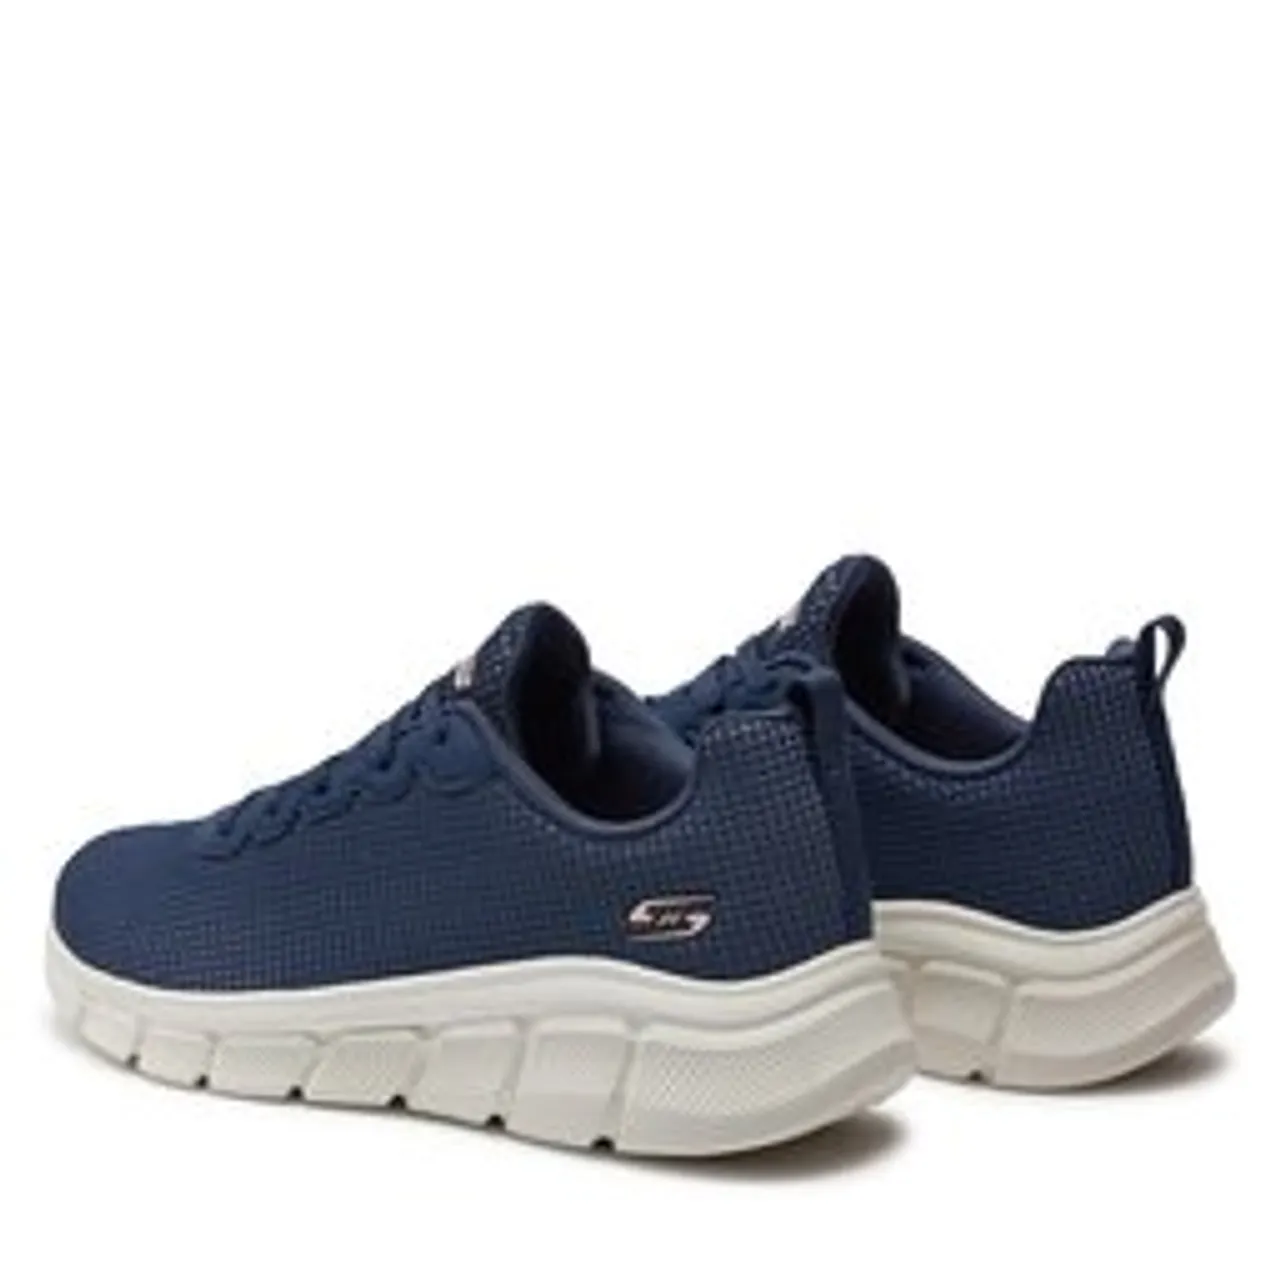 Sneakers Skechers Bobs B Flex-Visionary Essence 117346/NVY Navy